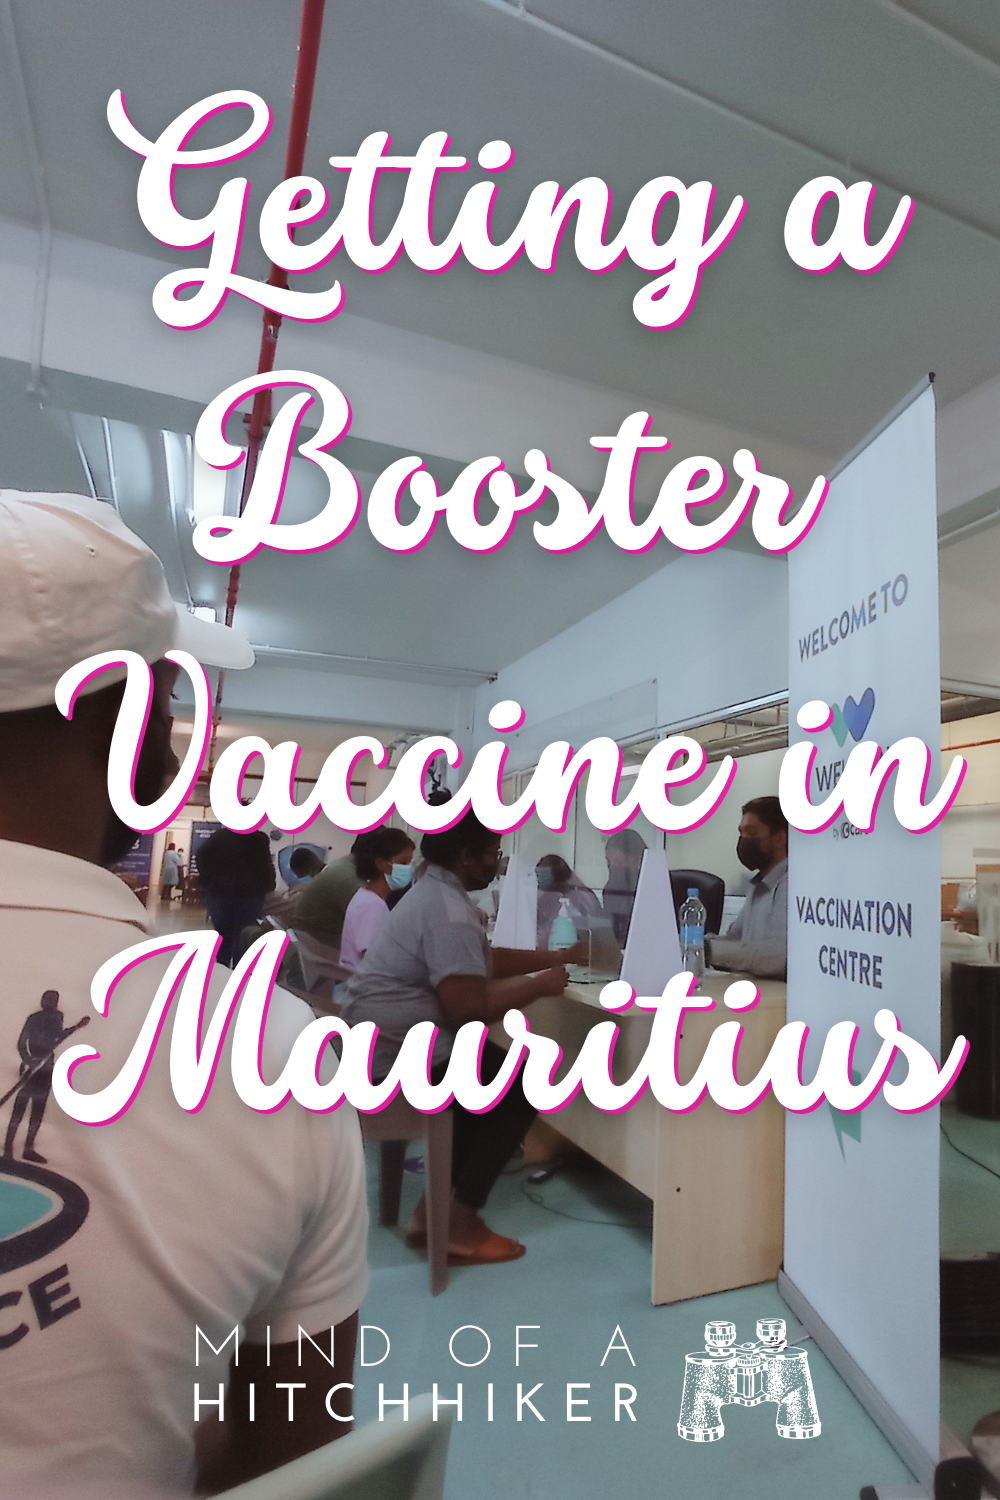 3 getting revaccinated with an eu-approved vaccine in Mauritius Africa